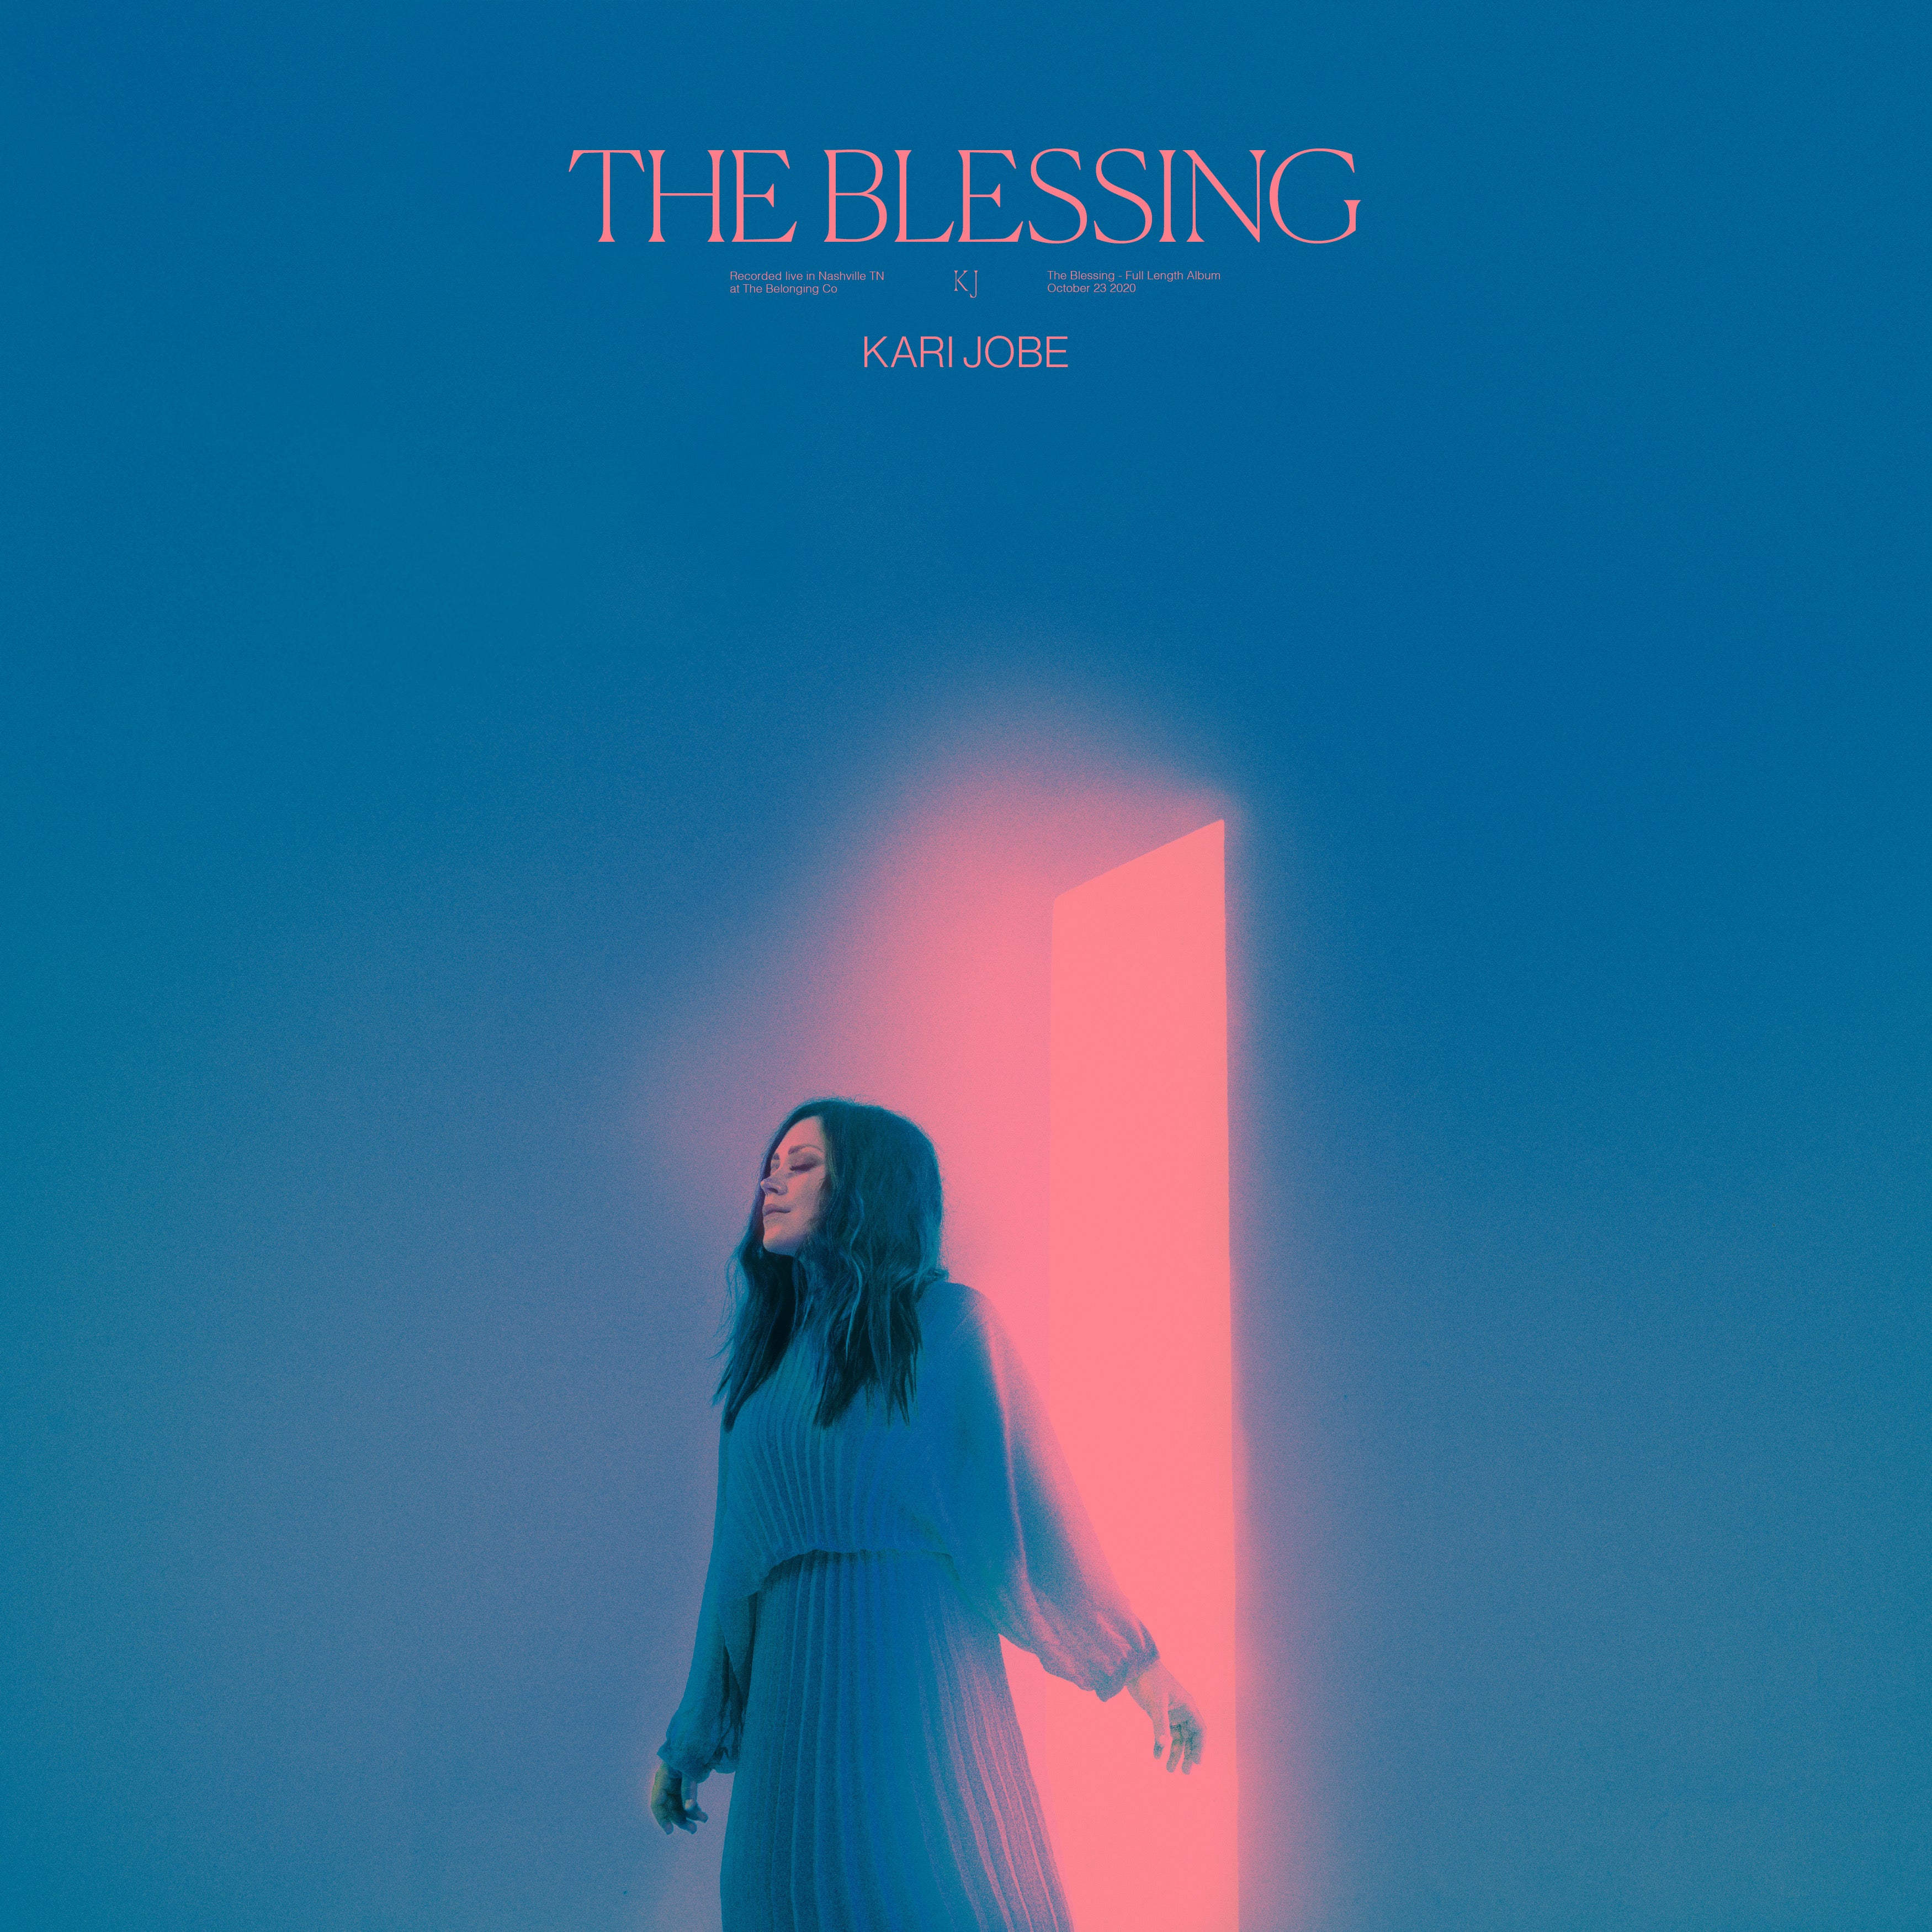 THE BLESSING - SINGLE-DISC